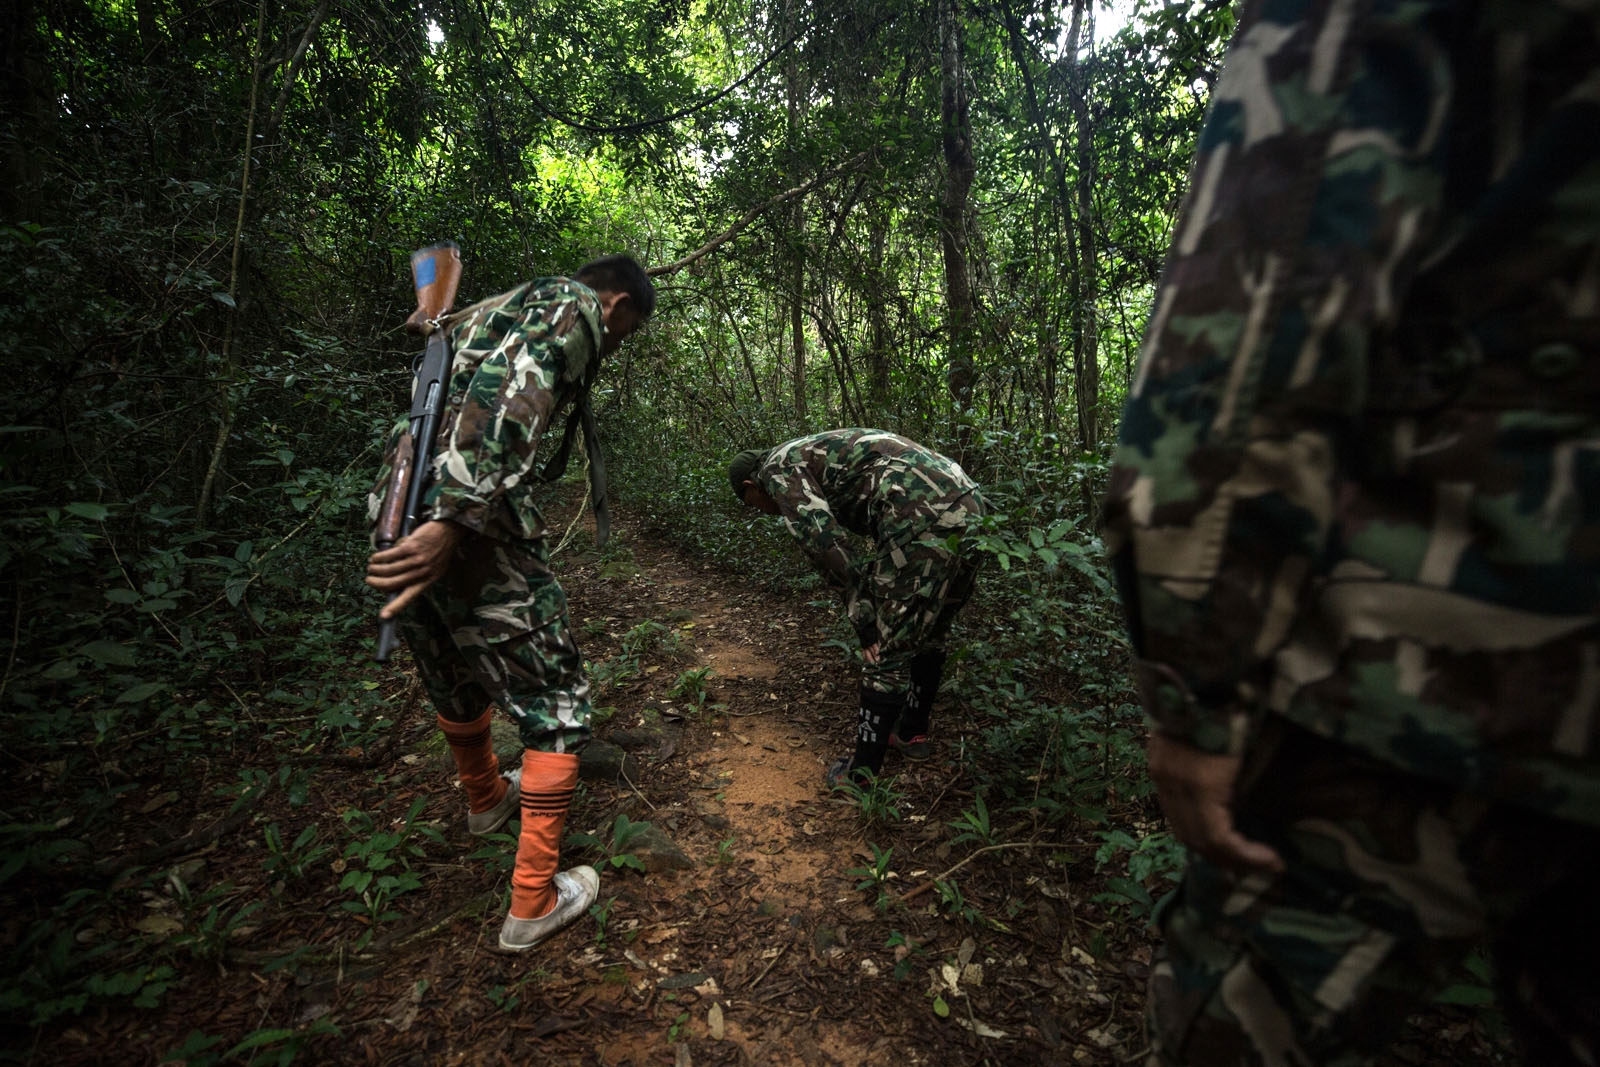 PROTECTING THAILANDS ROSEWOOD - Thai forest rangers inspect a well known loggers path for...